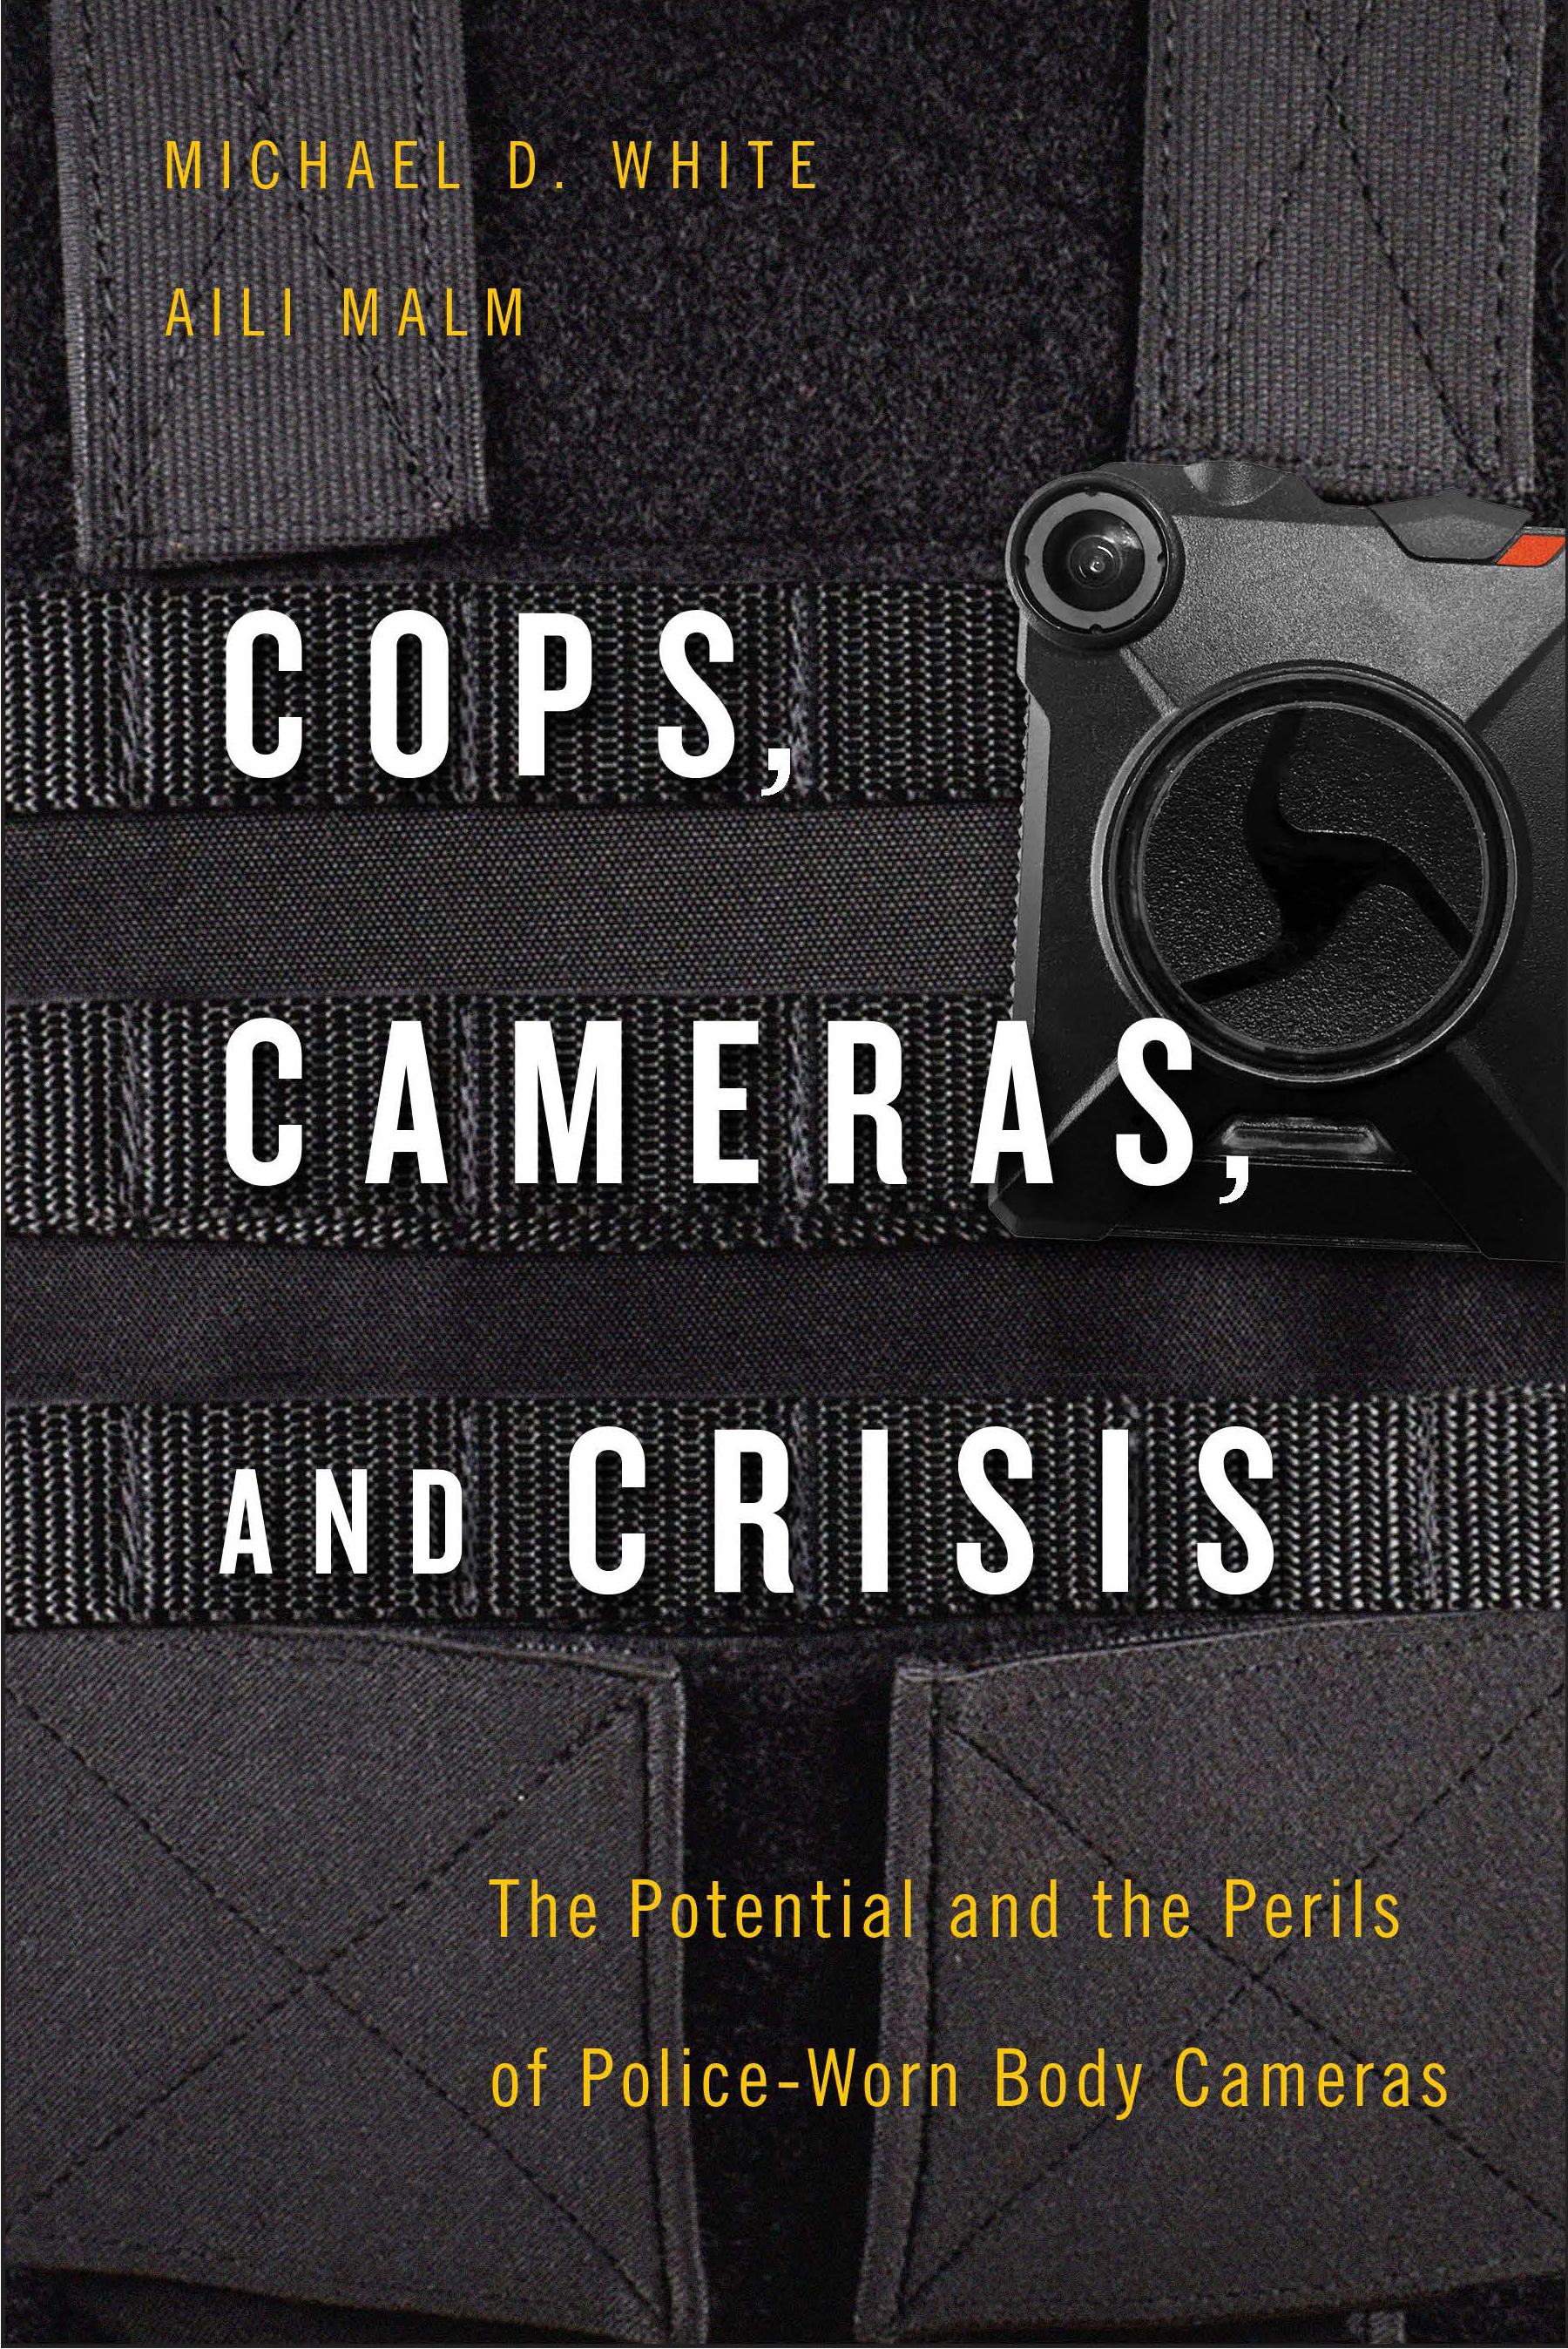 Book cover - Cops, cameras, and crisis: The potential and the perils of police body-worn cameras